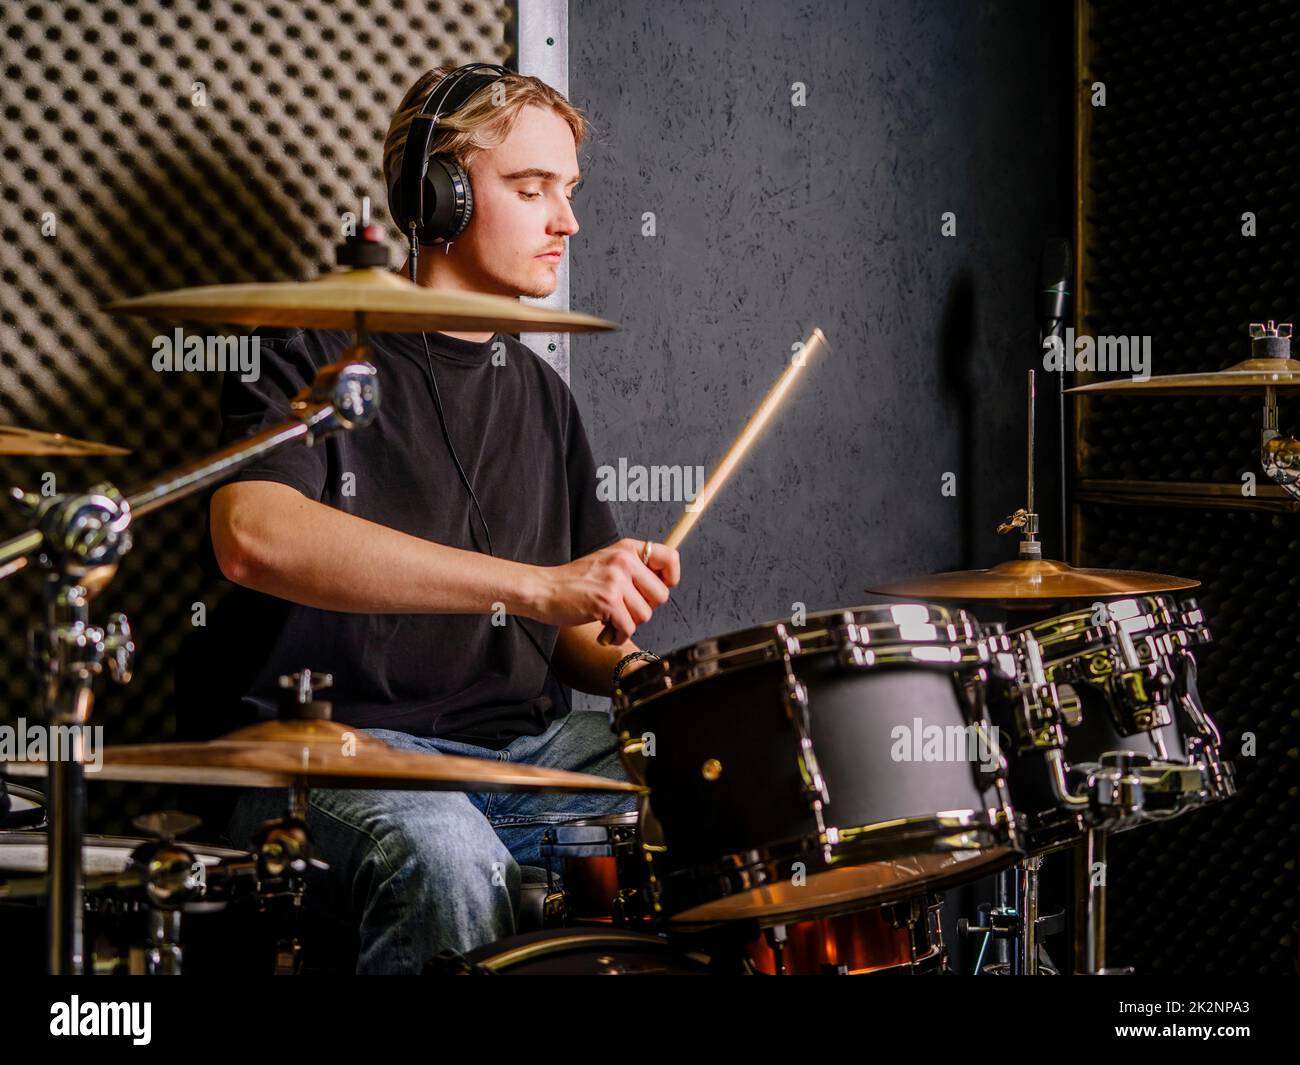 Young man playing drums in a recording studio Stock Photo